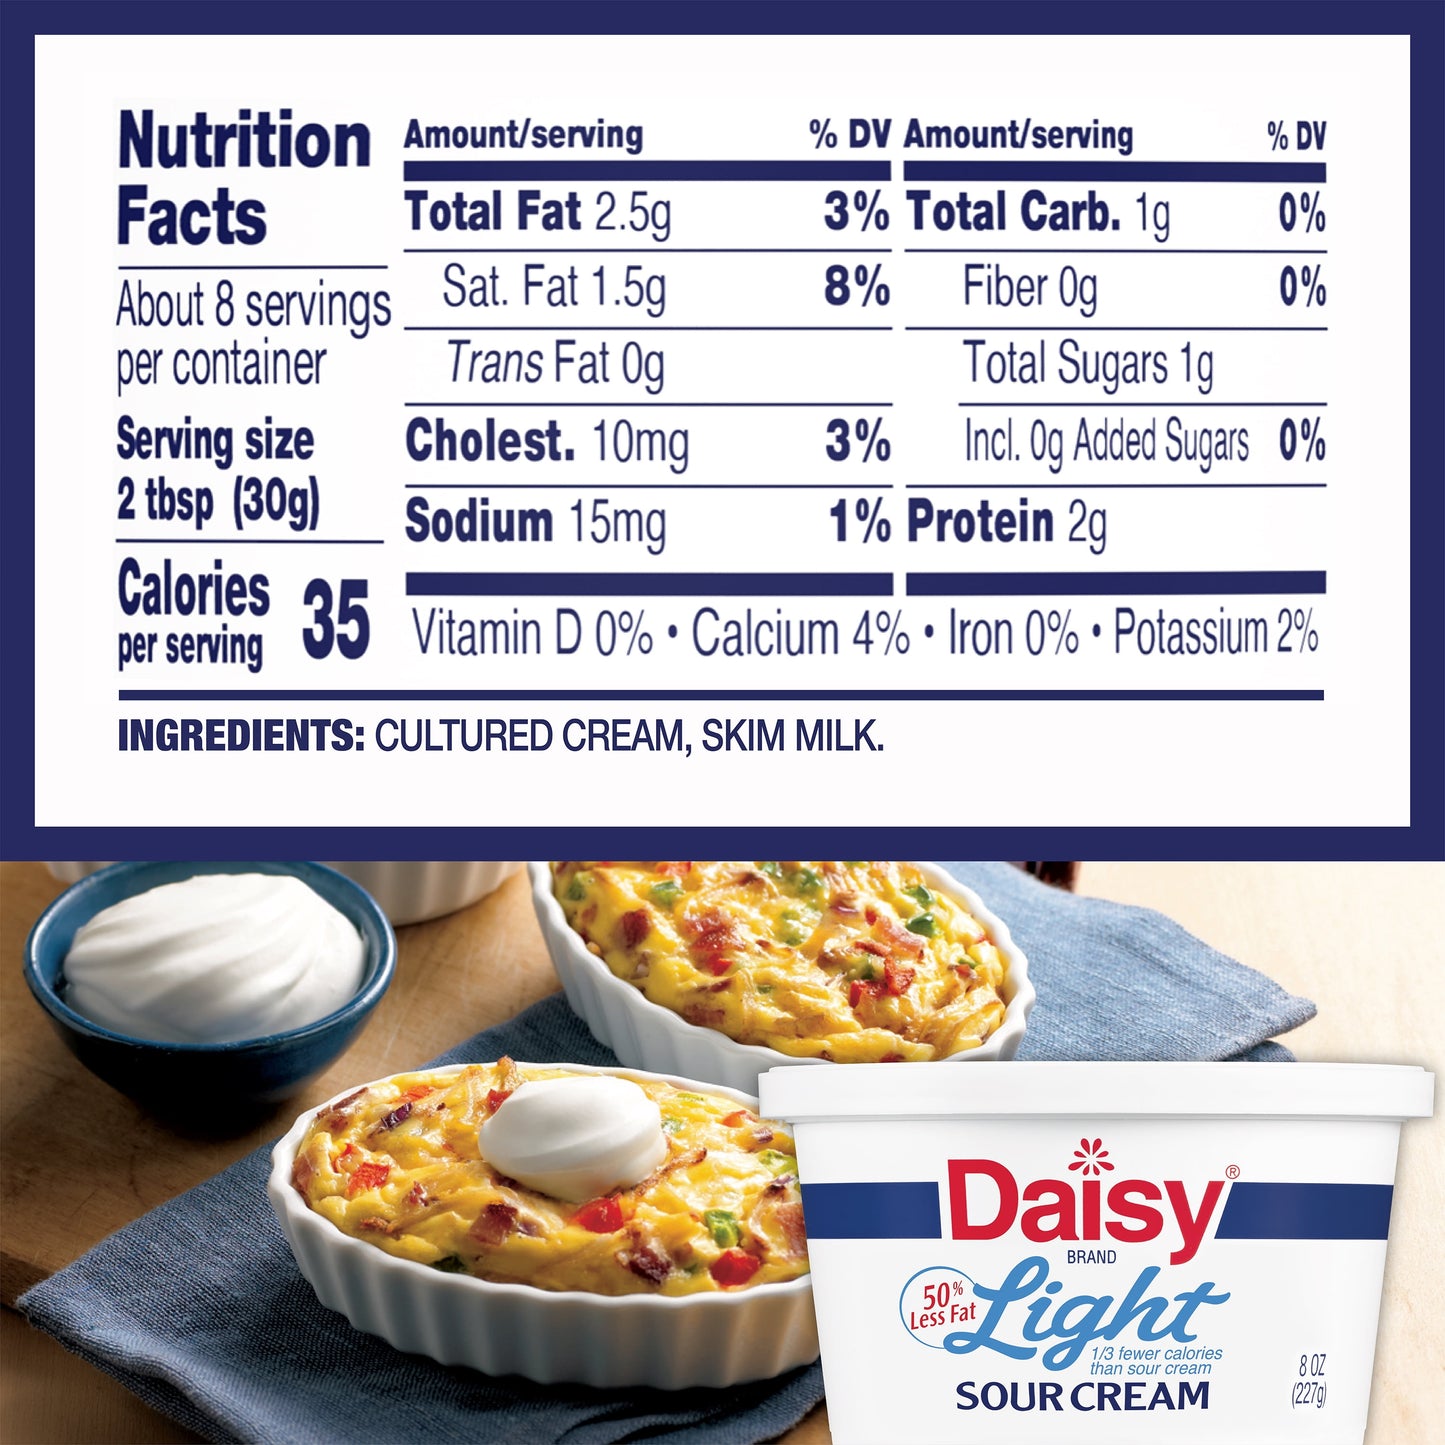 Daisy Pure and Natural Light Sour Cream, 50% Less Fat, 8 oz Tub (Refrigerated)